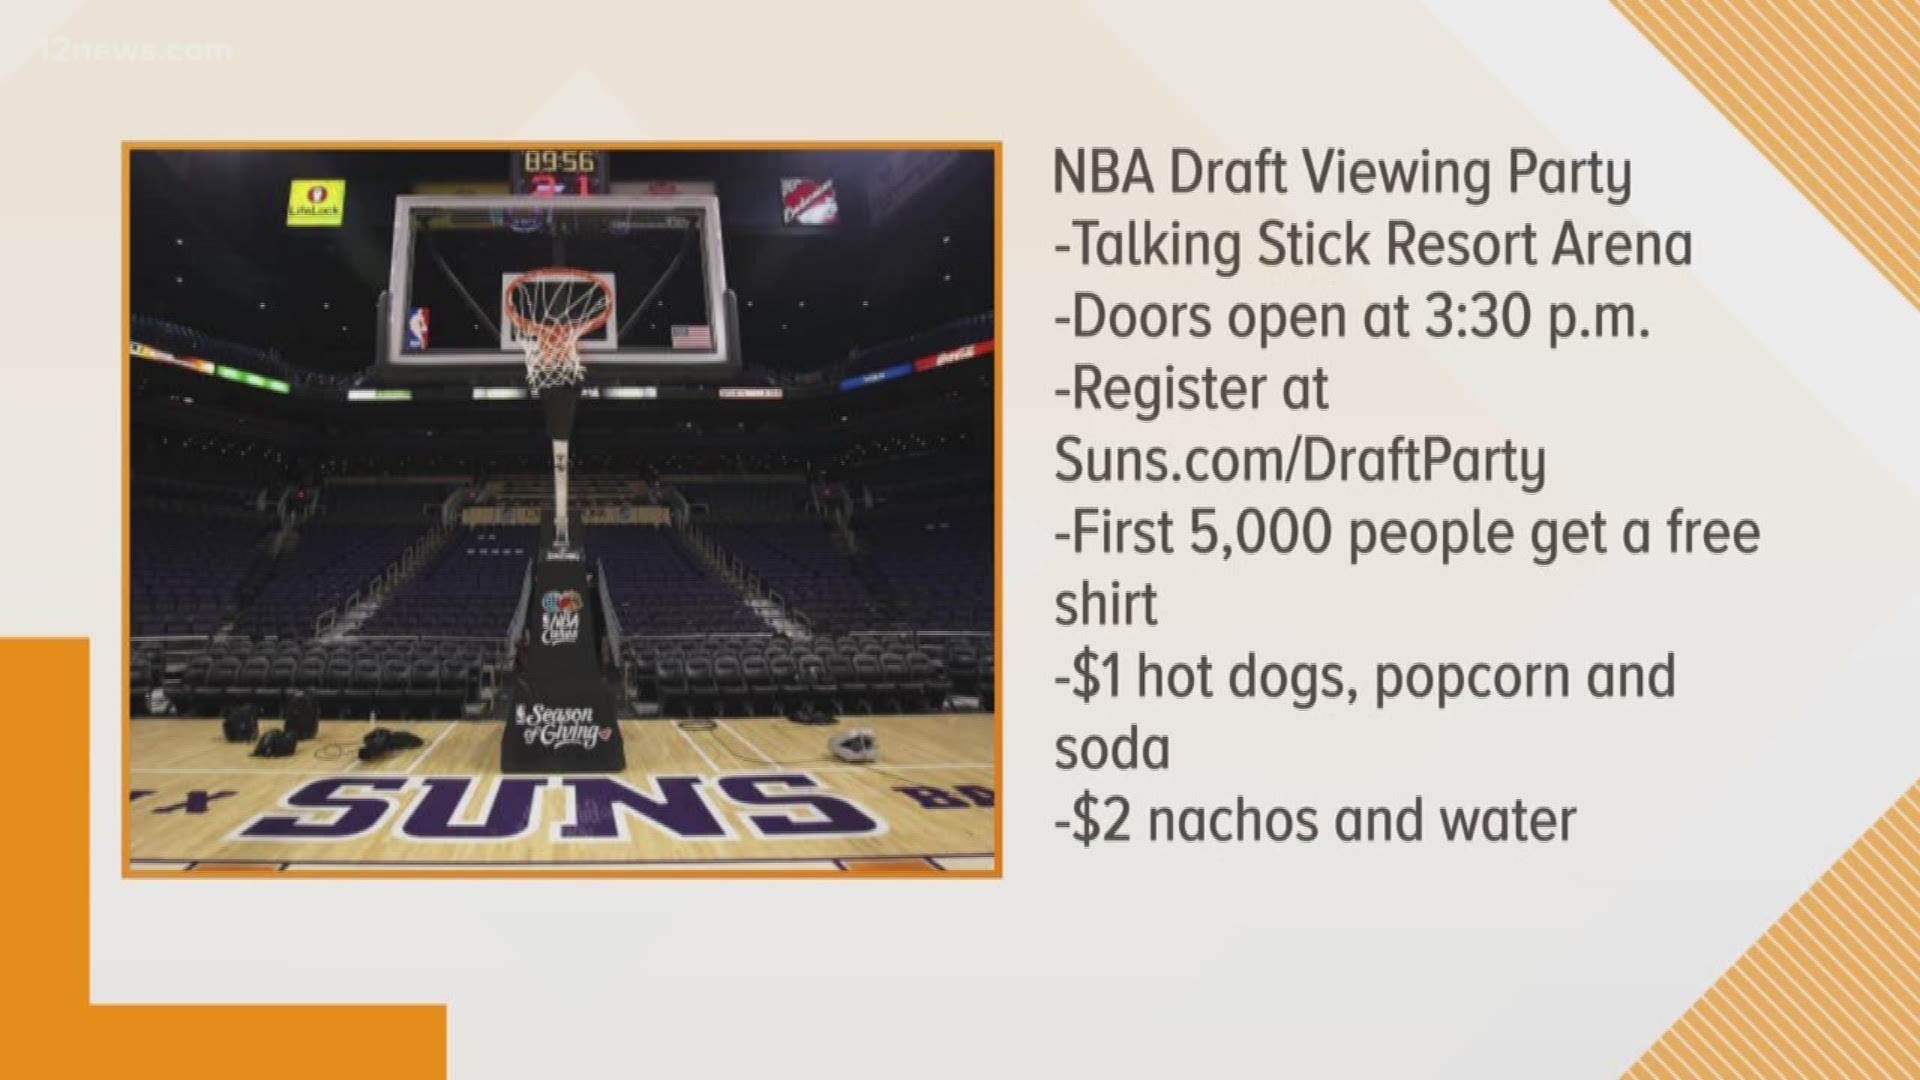 The Suns are the proud owners of the number one selection in the NBA draft for the first time in franchise history. This is how fans can get in on the action at Talking Stick Resort.